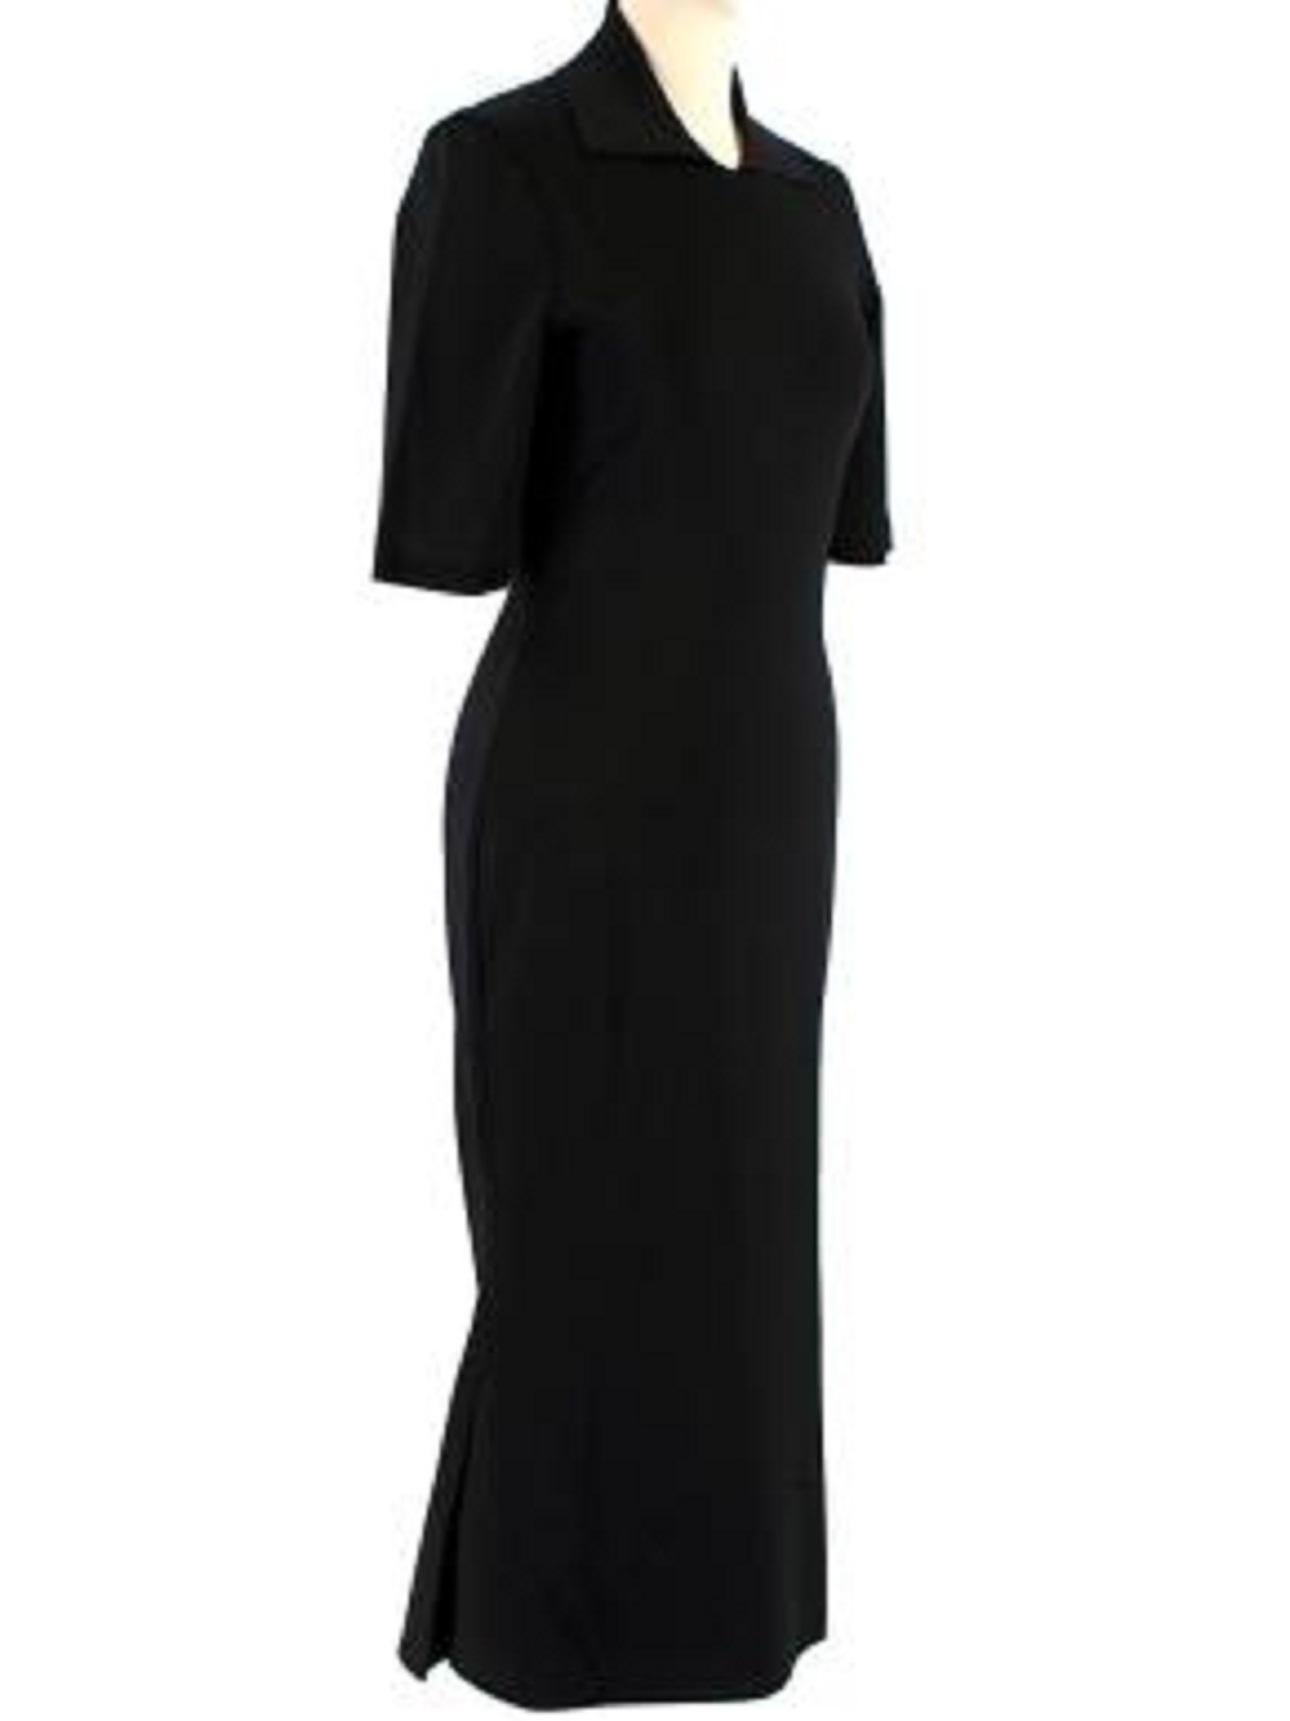 Victoria Beckham Black Stretch Knit Polo Midi Dress In Good Condition For Sale In London, GB